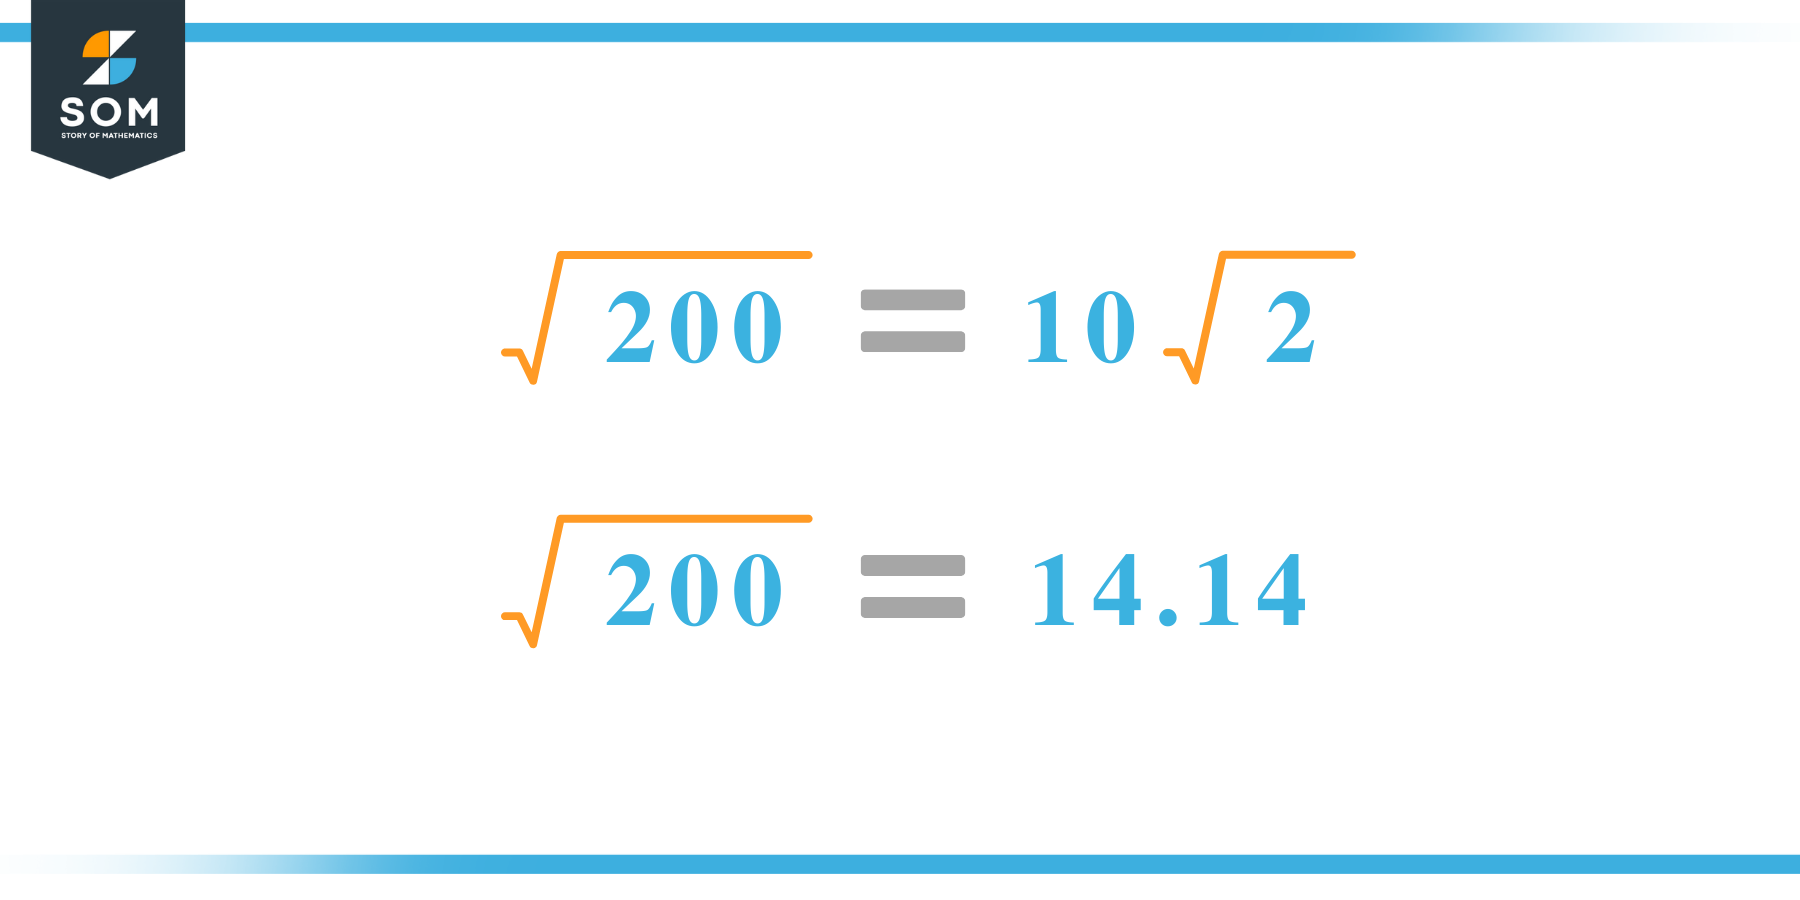 Square root of the 200 Calculation